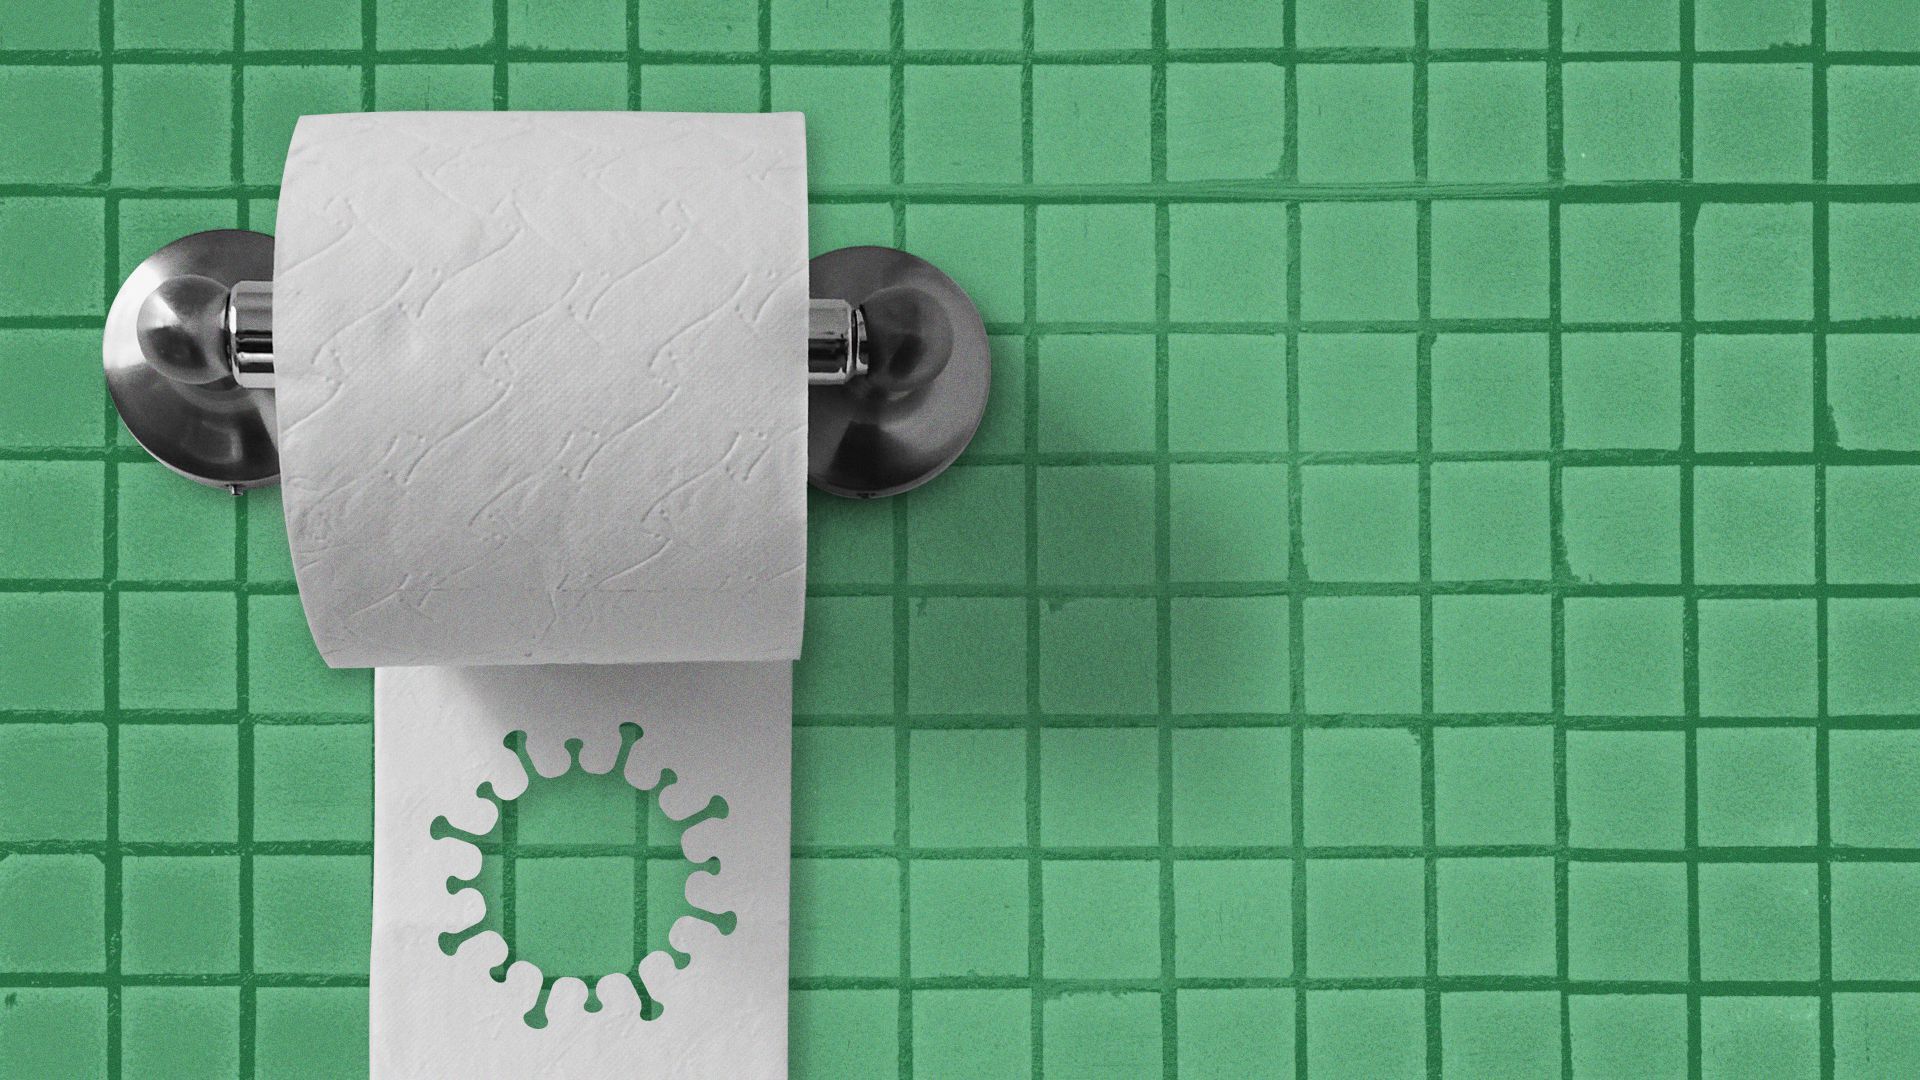 Illustration of a tiled wall with a COVID cell cut into a sheet of toilet paper on the roll.